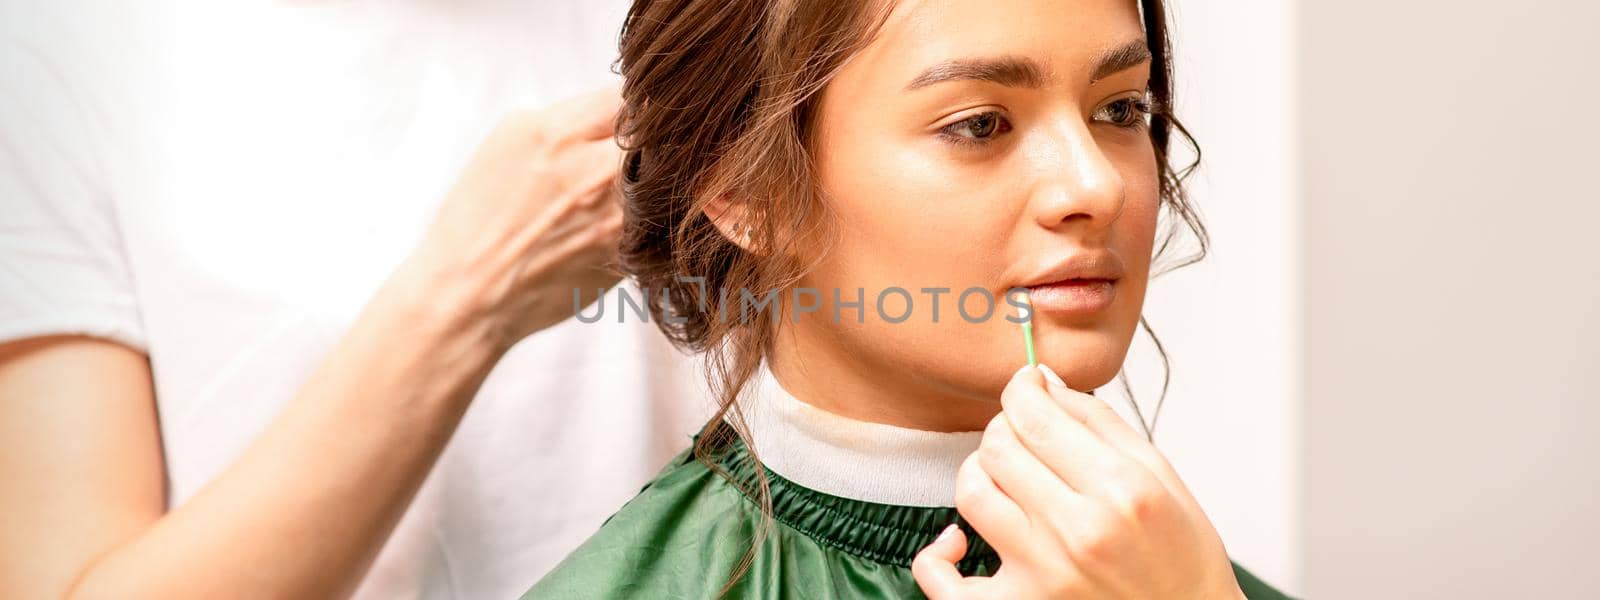 Makeup artist and hairdresser prepare the bride making hairstyle and makeup in a beauty salon